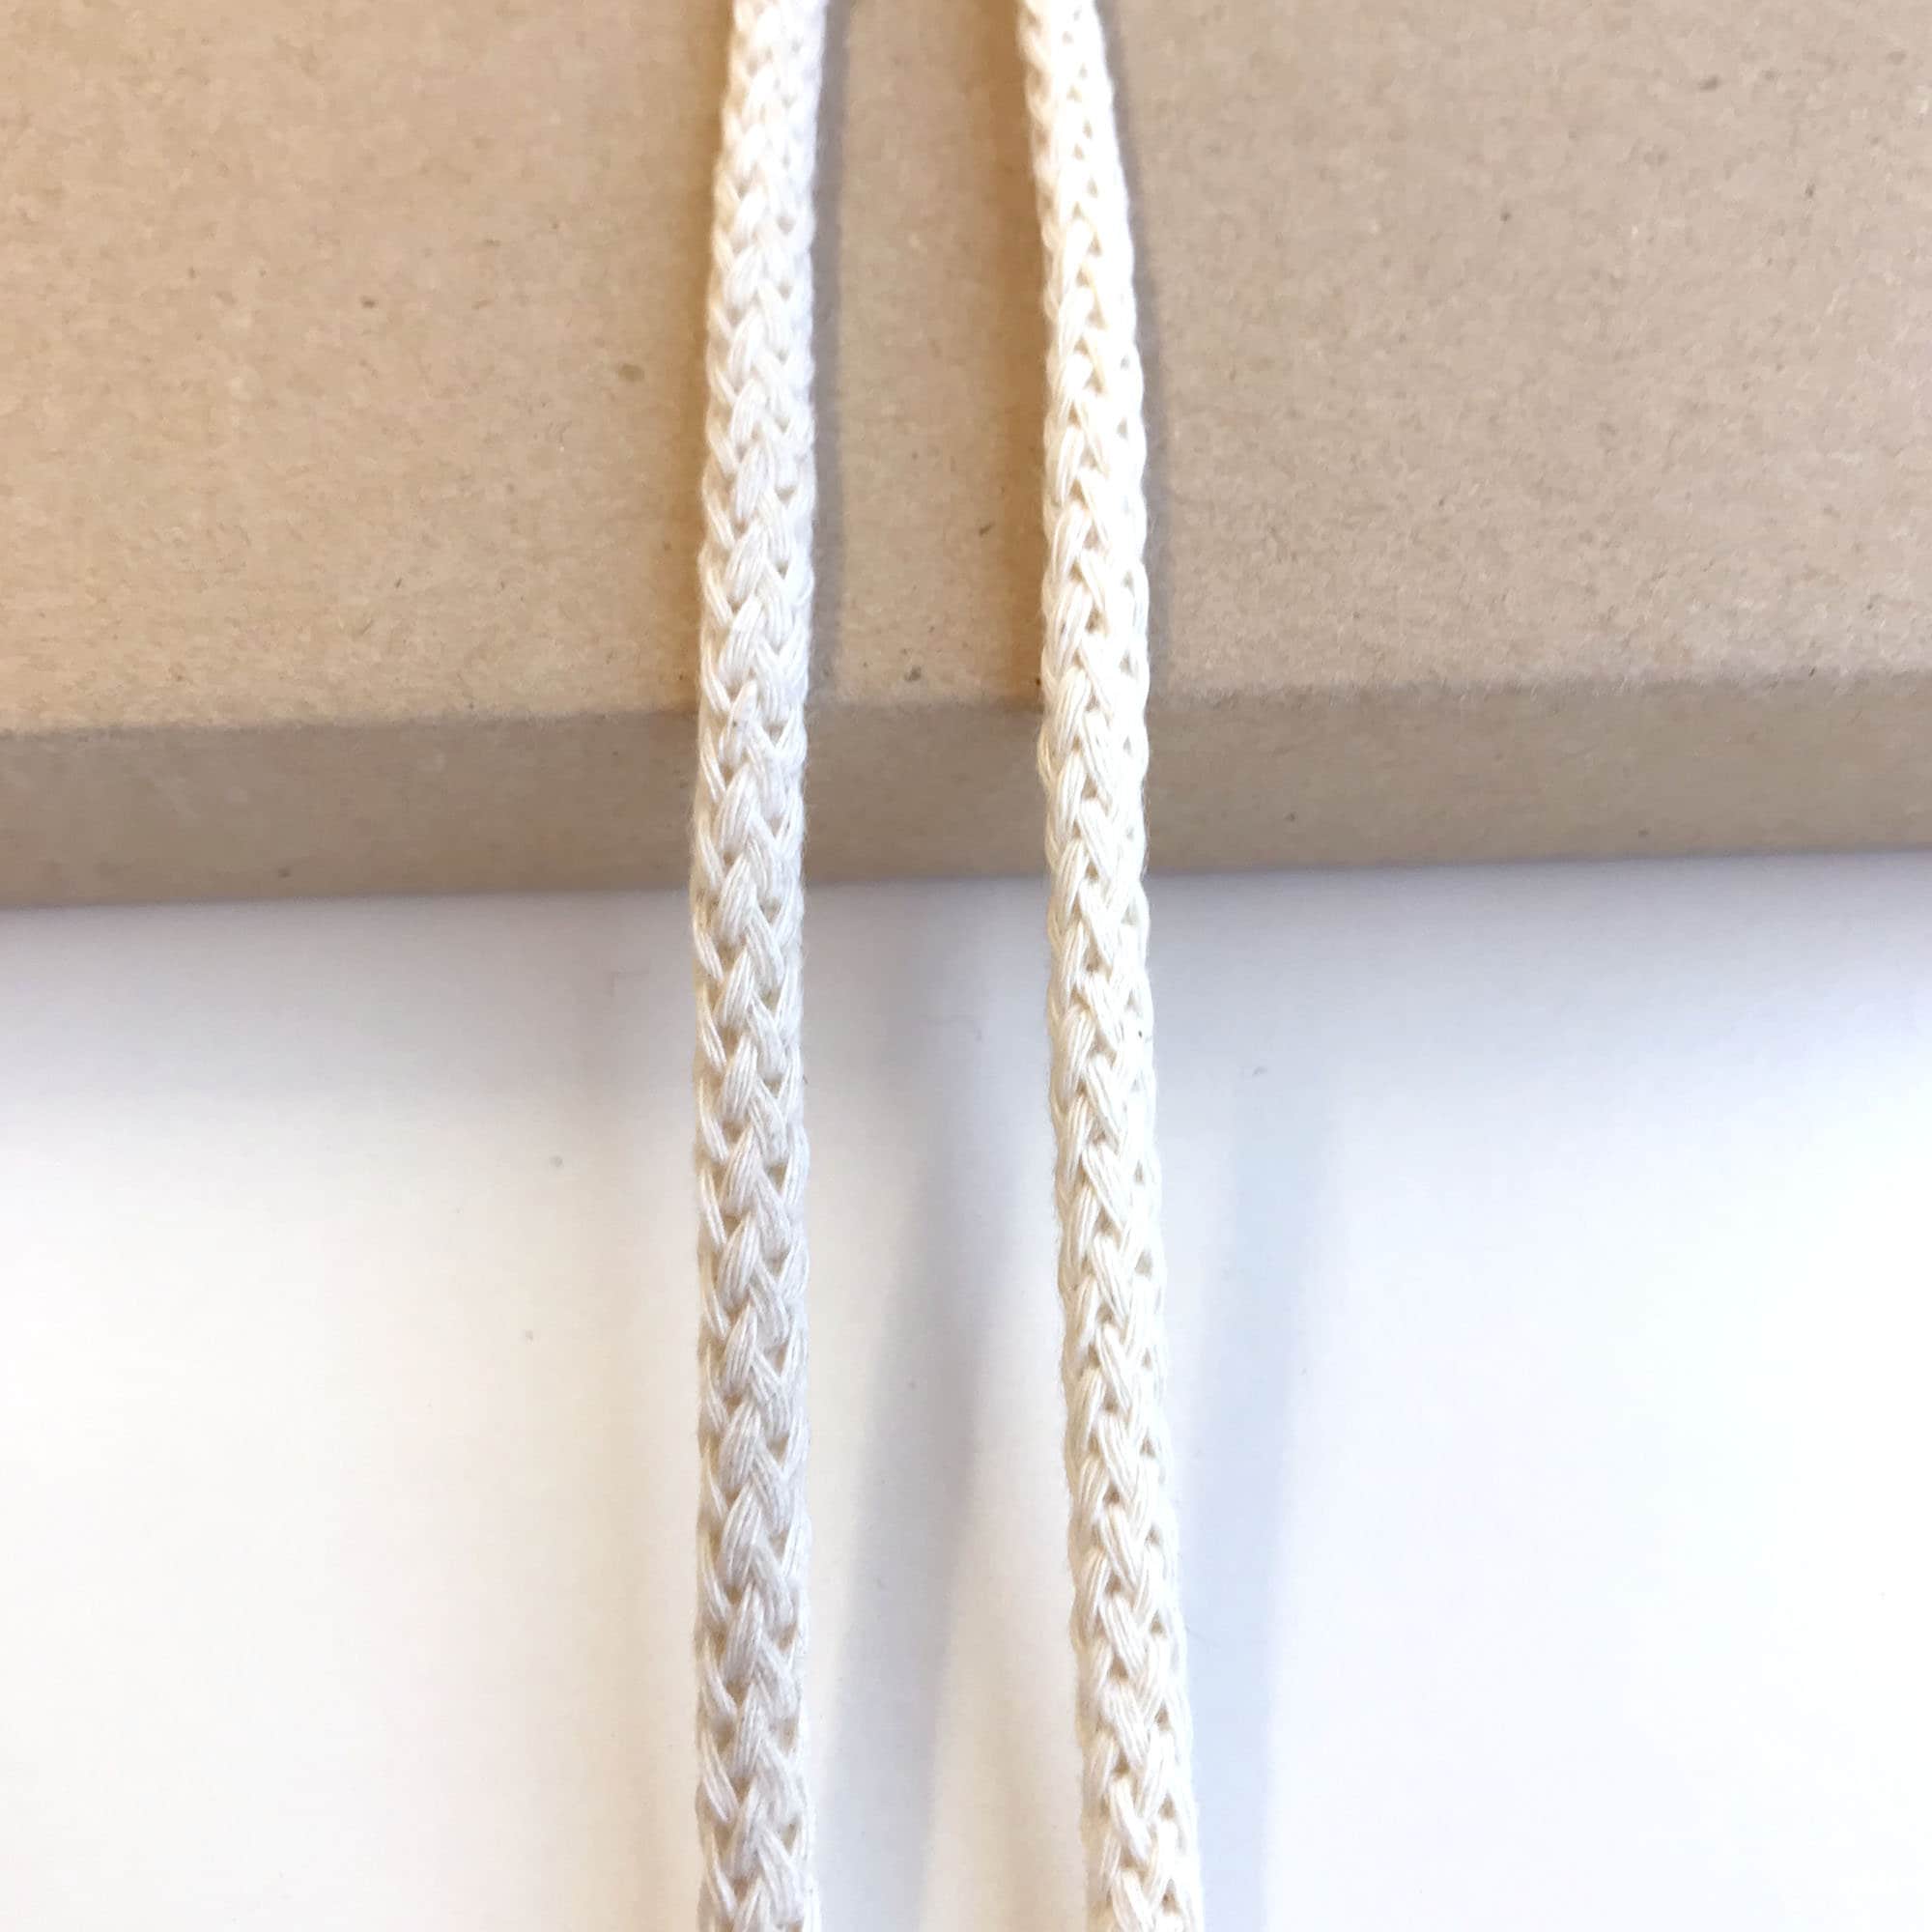 1/8 Round Braided Cotton Linen Drawcord Drawstring Cord (3, 5 or 10 yards)